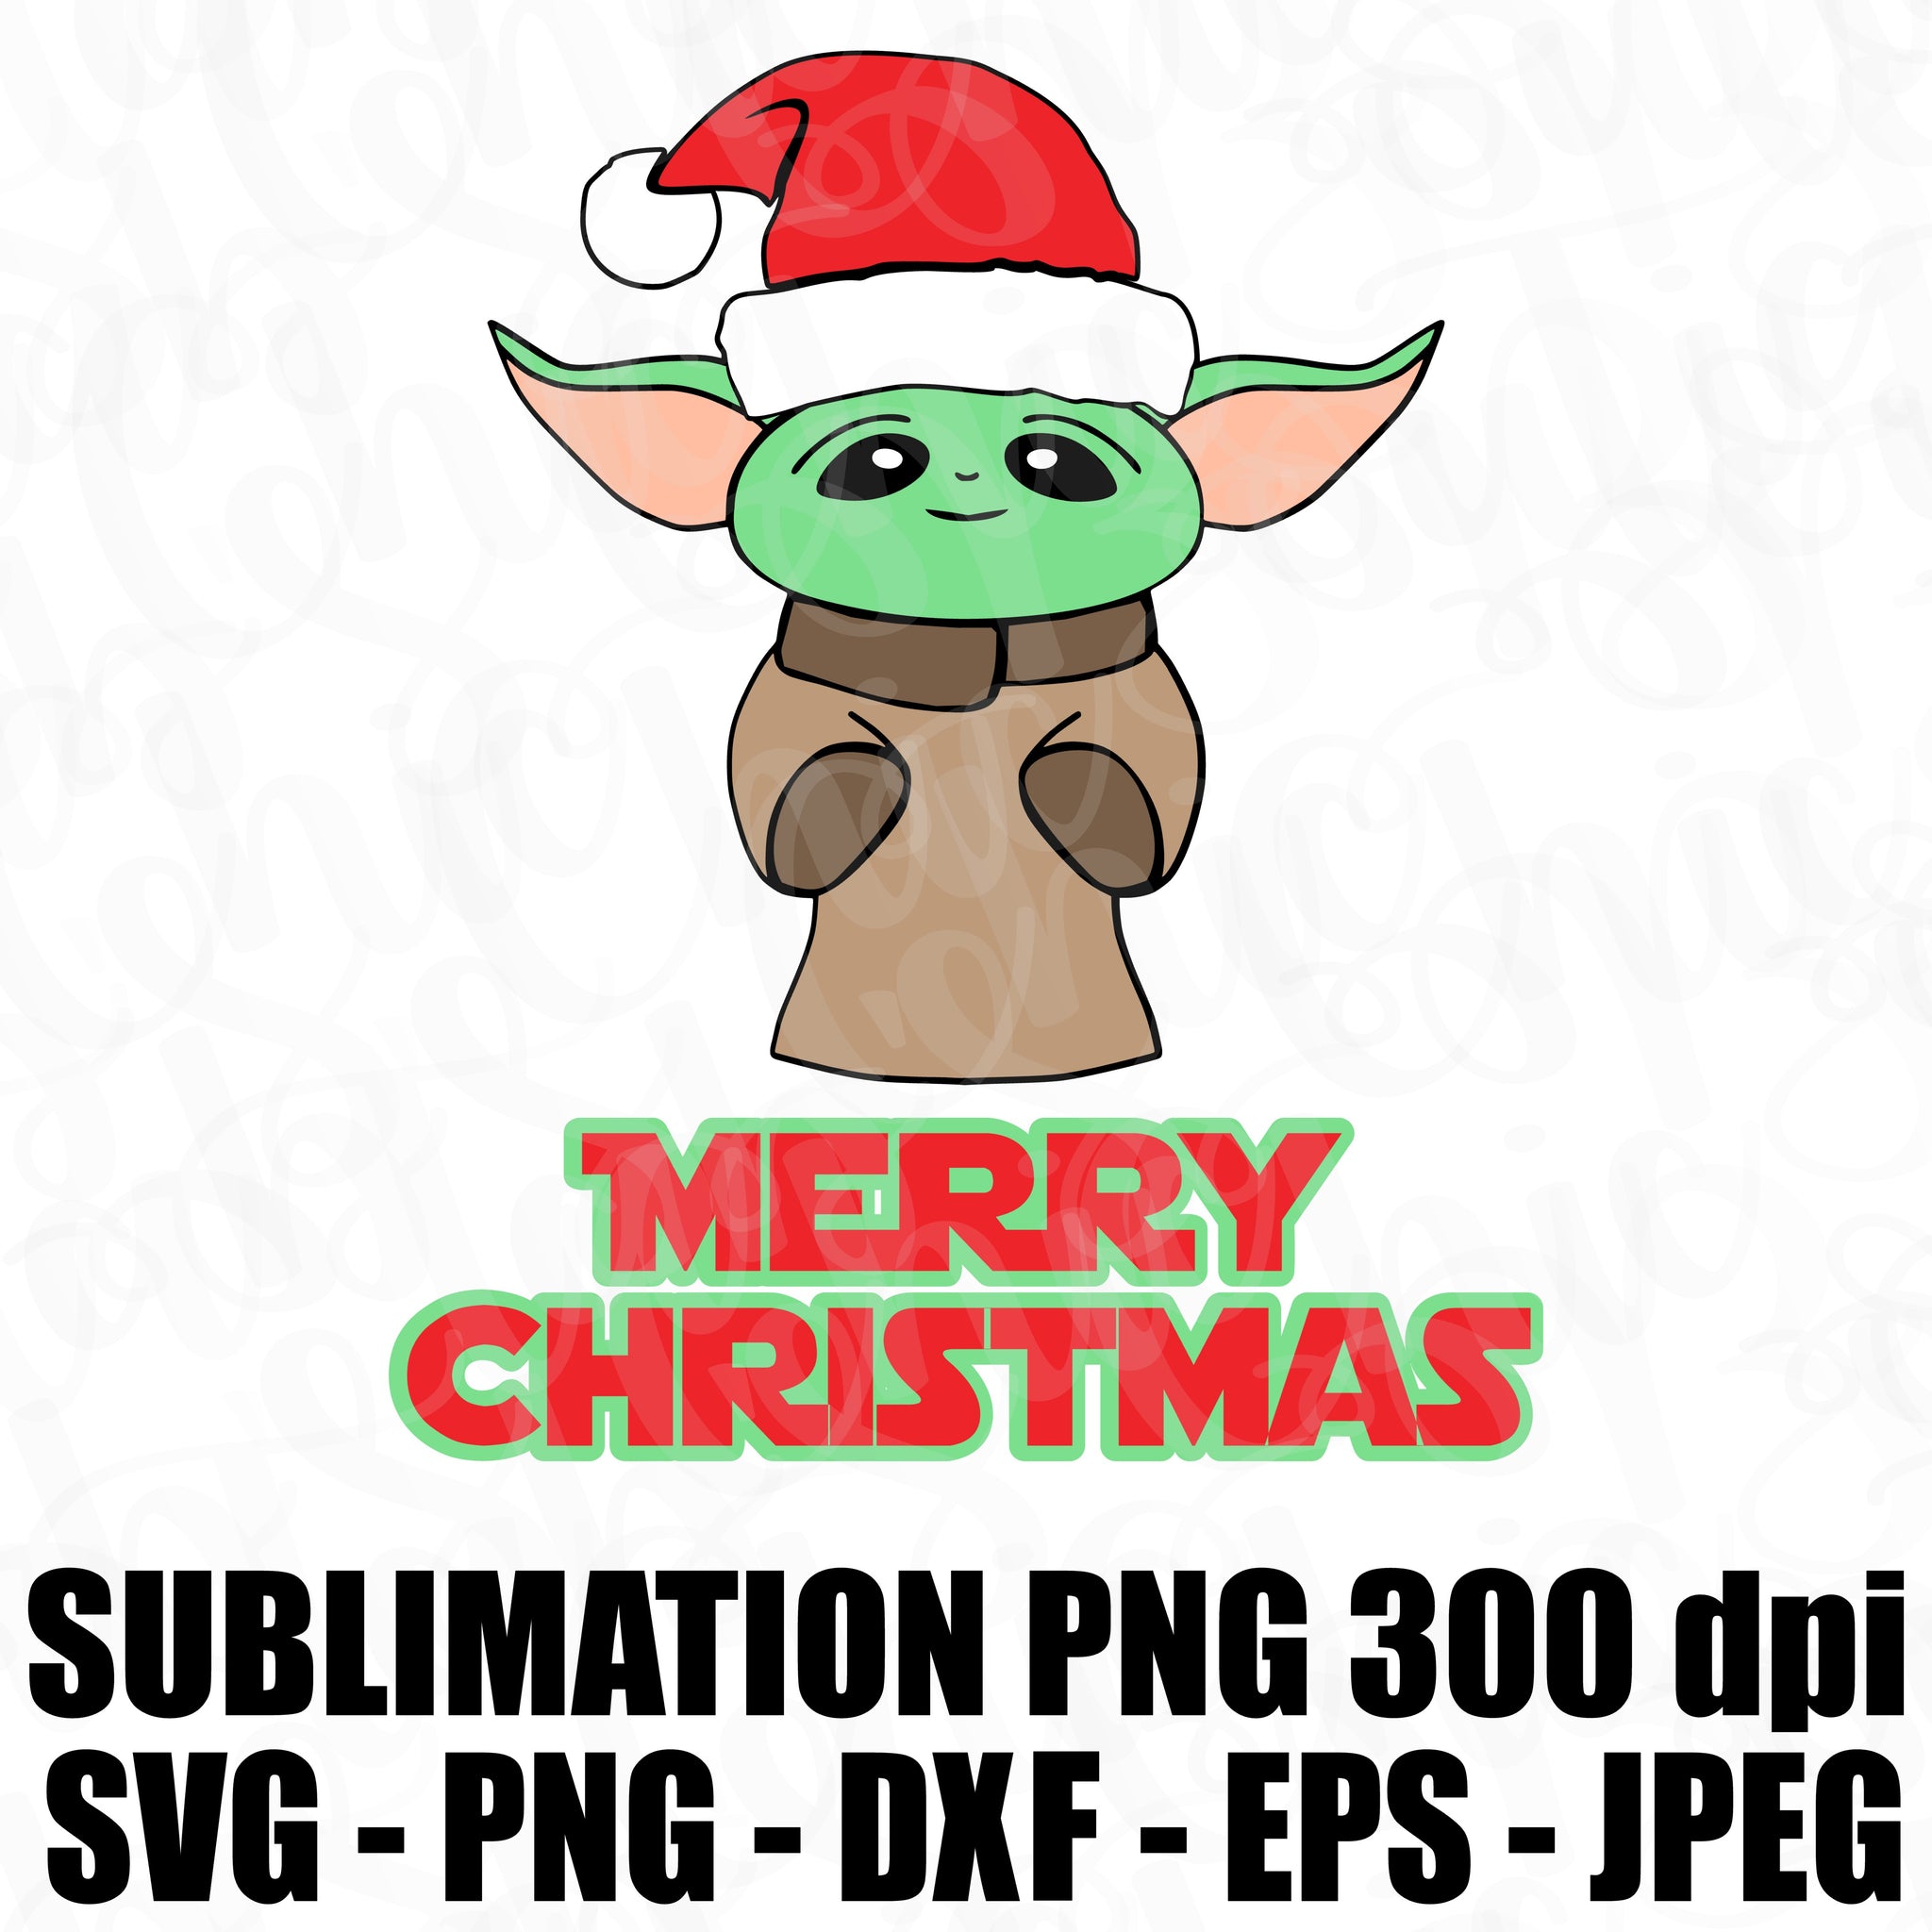 Download Merry Christmas Baby Yoda Star Wars The Mandalorian Svg Jpeg High Def Tab S Chic Boutique